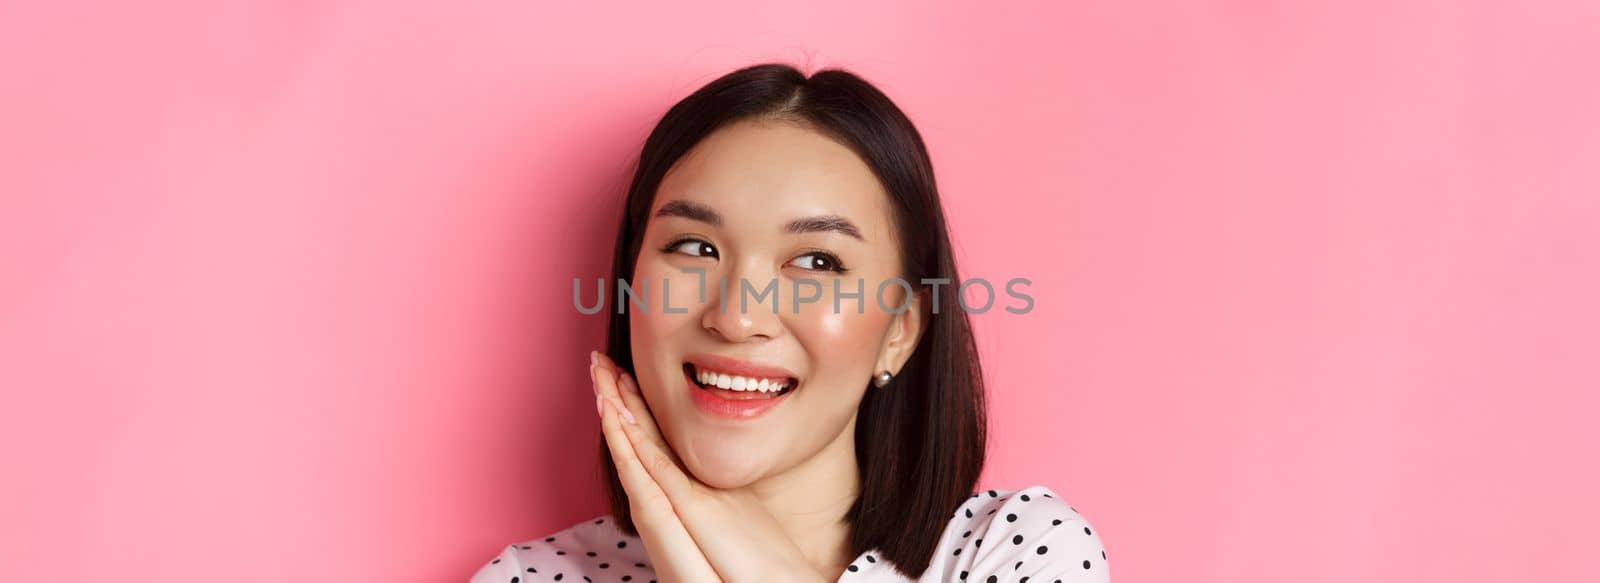 Beauty and skin care concept. Headshot of adorable and dreamy asian woman looking left, smiling and imaging, standing against pink background.